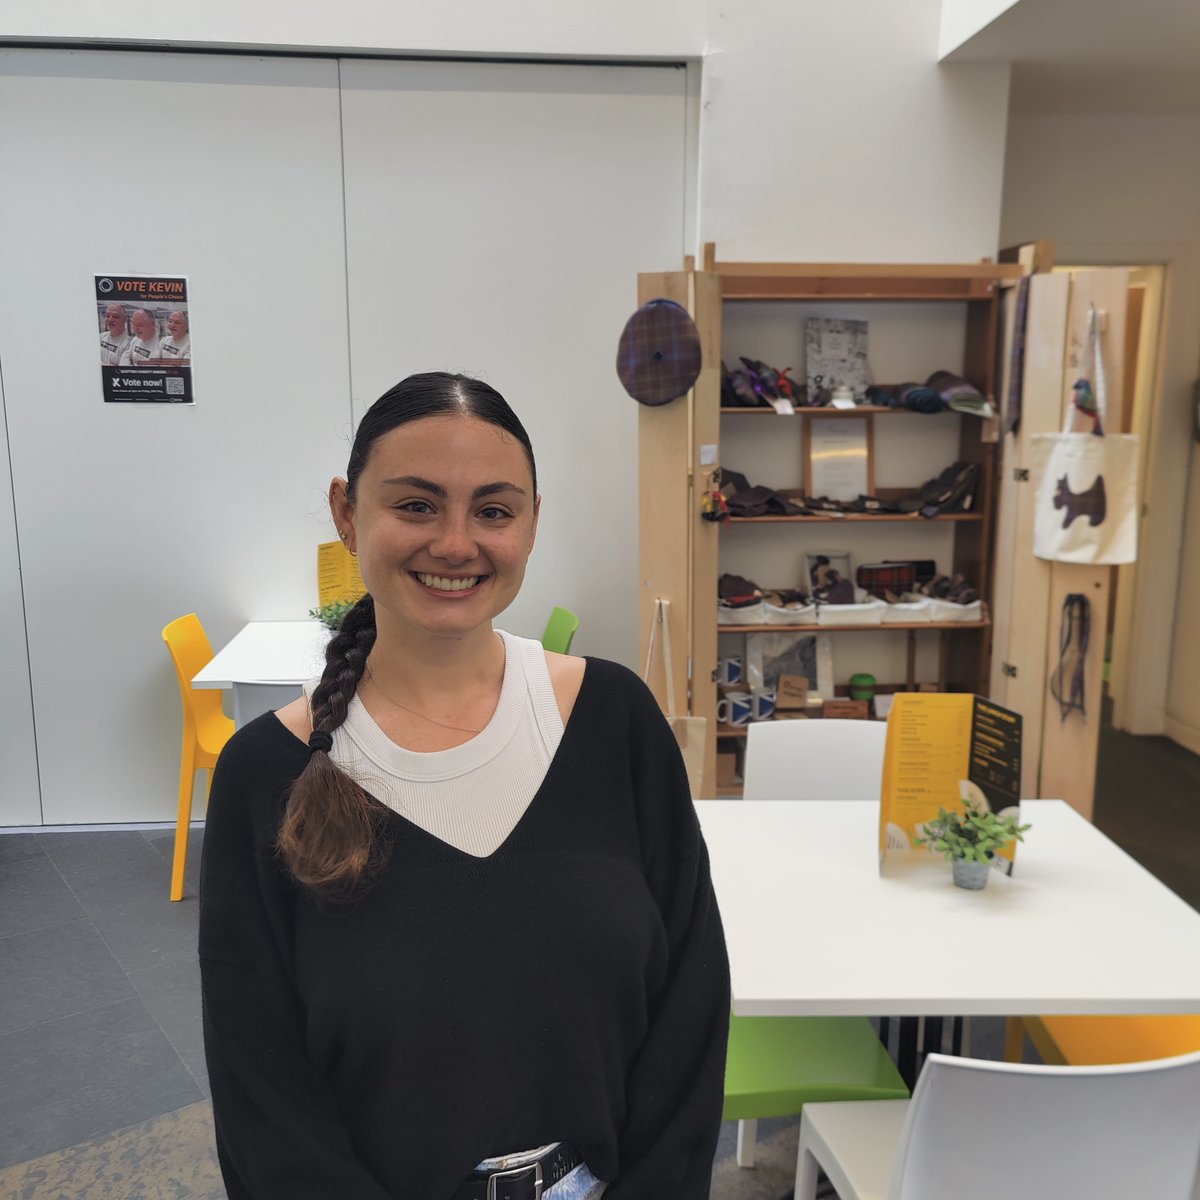 Meet Sydni, our new social work placement 🙂 She is doing her MSc @EdinburghUni, specialising in Social Care, ‘I am so happy to be at GCP. I love how members are always the focus for decision making. The atmosphere and ethos is great.' THANK YOU Sydni for all your hard work! ❤